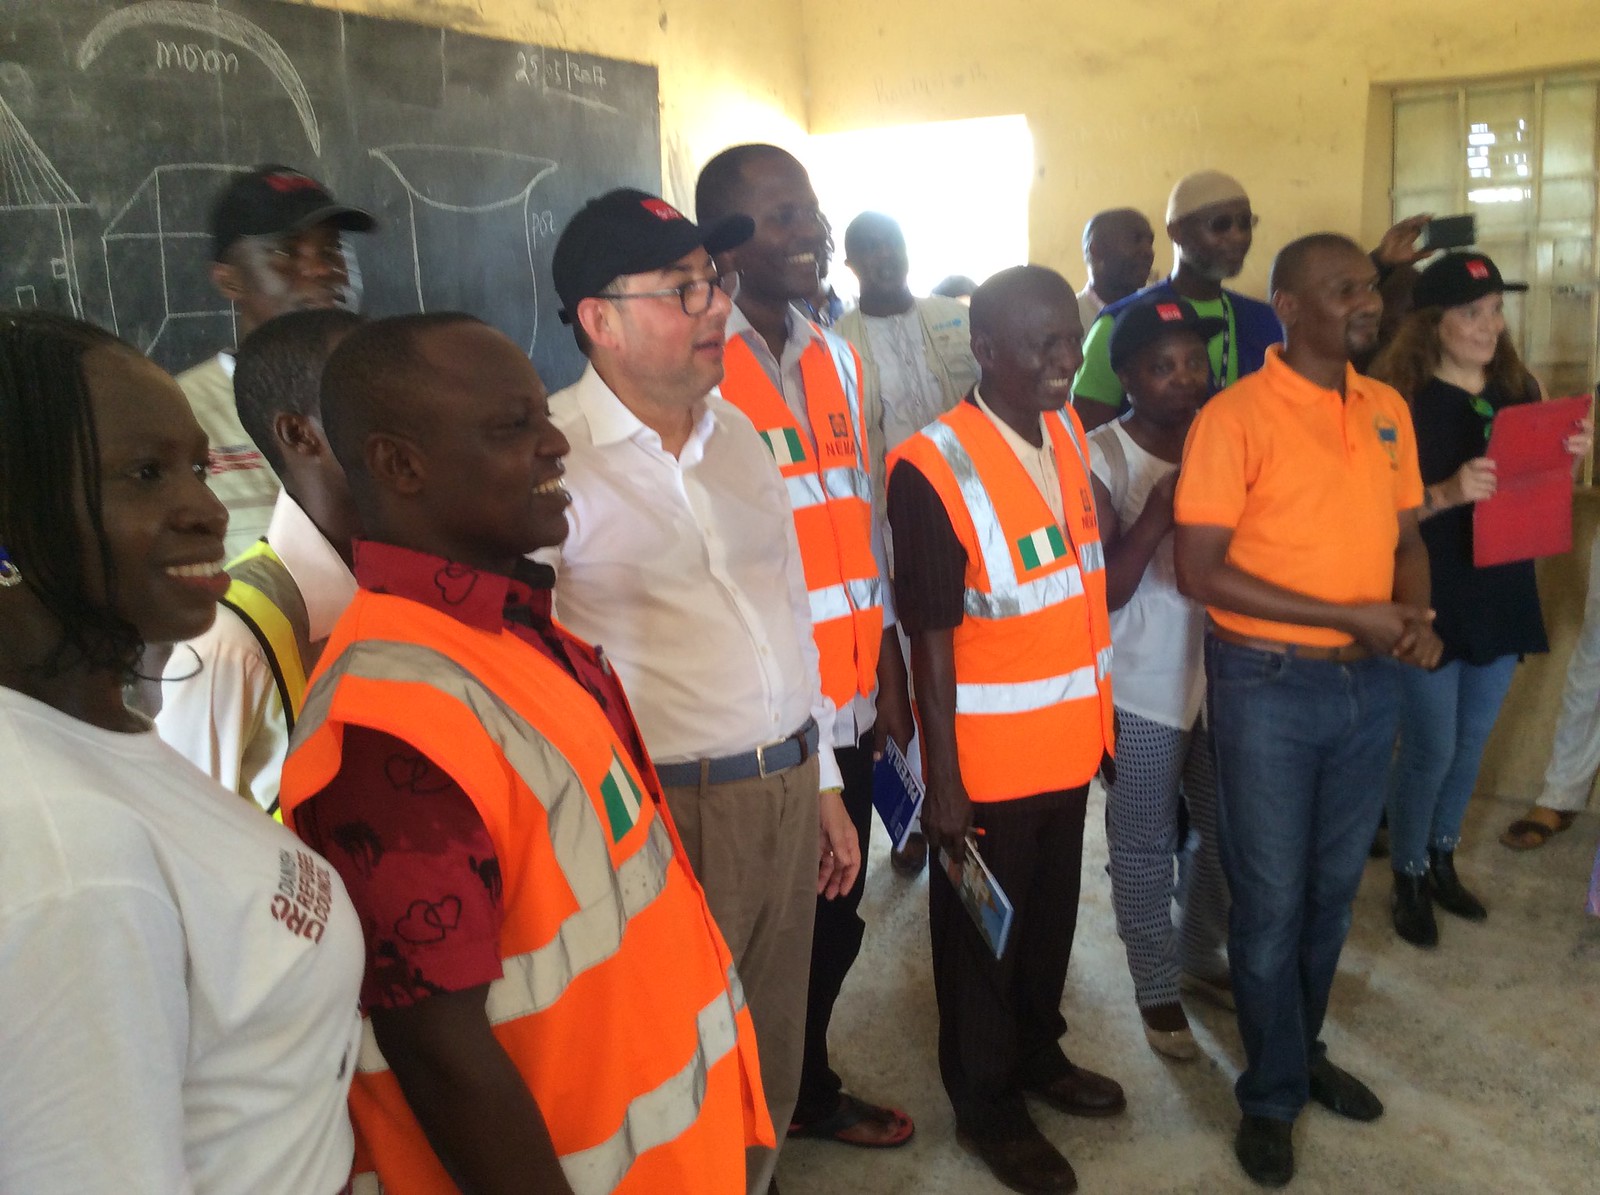 S&D MEPs visit the Malkohi official and unofficial refugee camps in Yola, in north-east Nigeria, which hosts thousands of internally displaced people fleeing Boko Haram and famine, during an S&D field visit to Nigeria and Guinea 2017